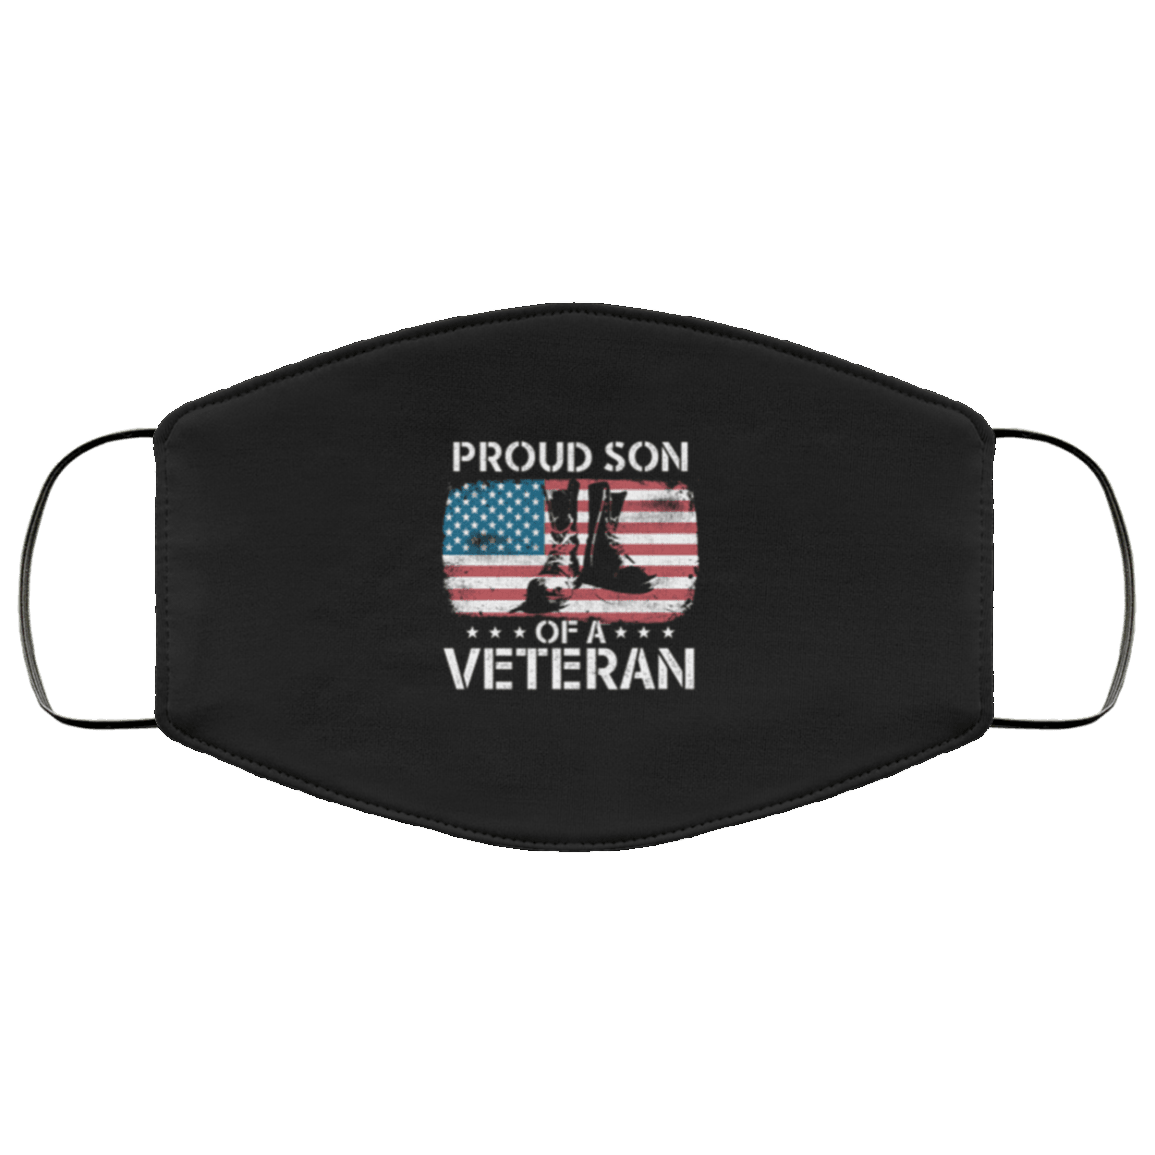 Designs by MyUtopia Shout Out:Proud Son of a Veteran Adult Fabric Face Mask with Elastic Ear Loops,3 Layer Fabric Face Mask / Black / Adult,Fabric Face Mask